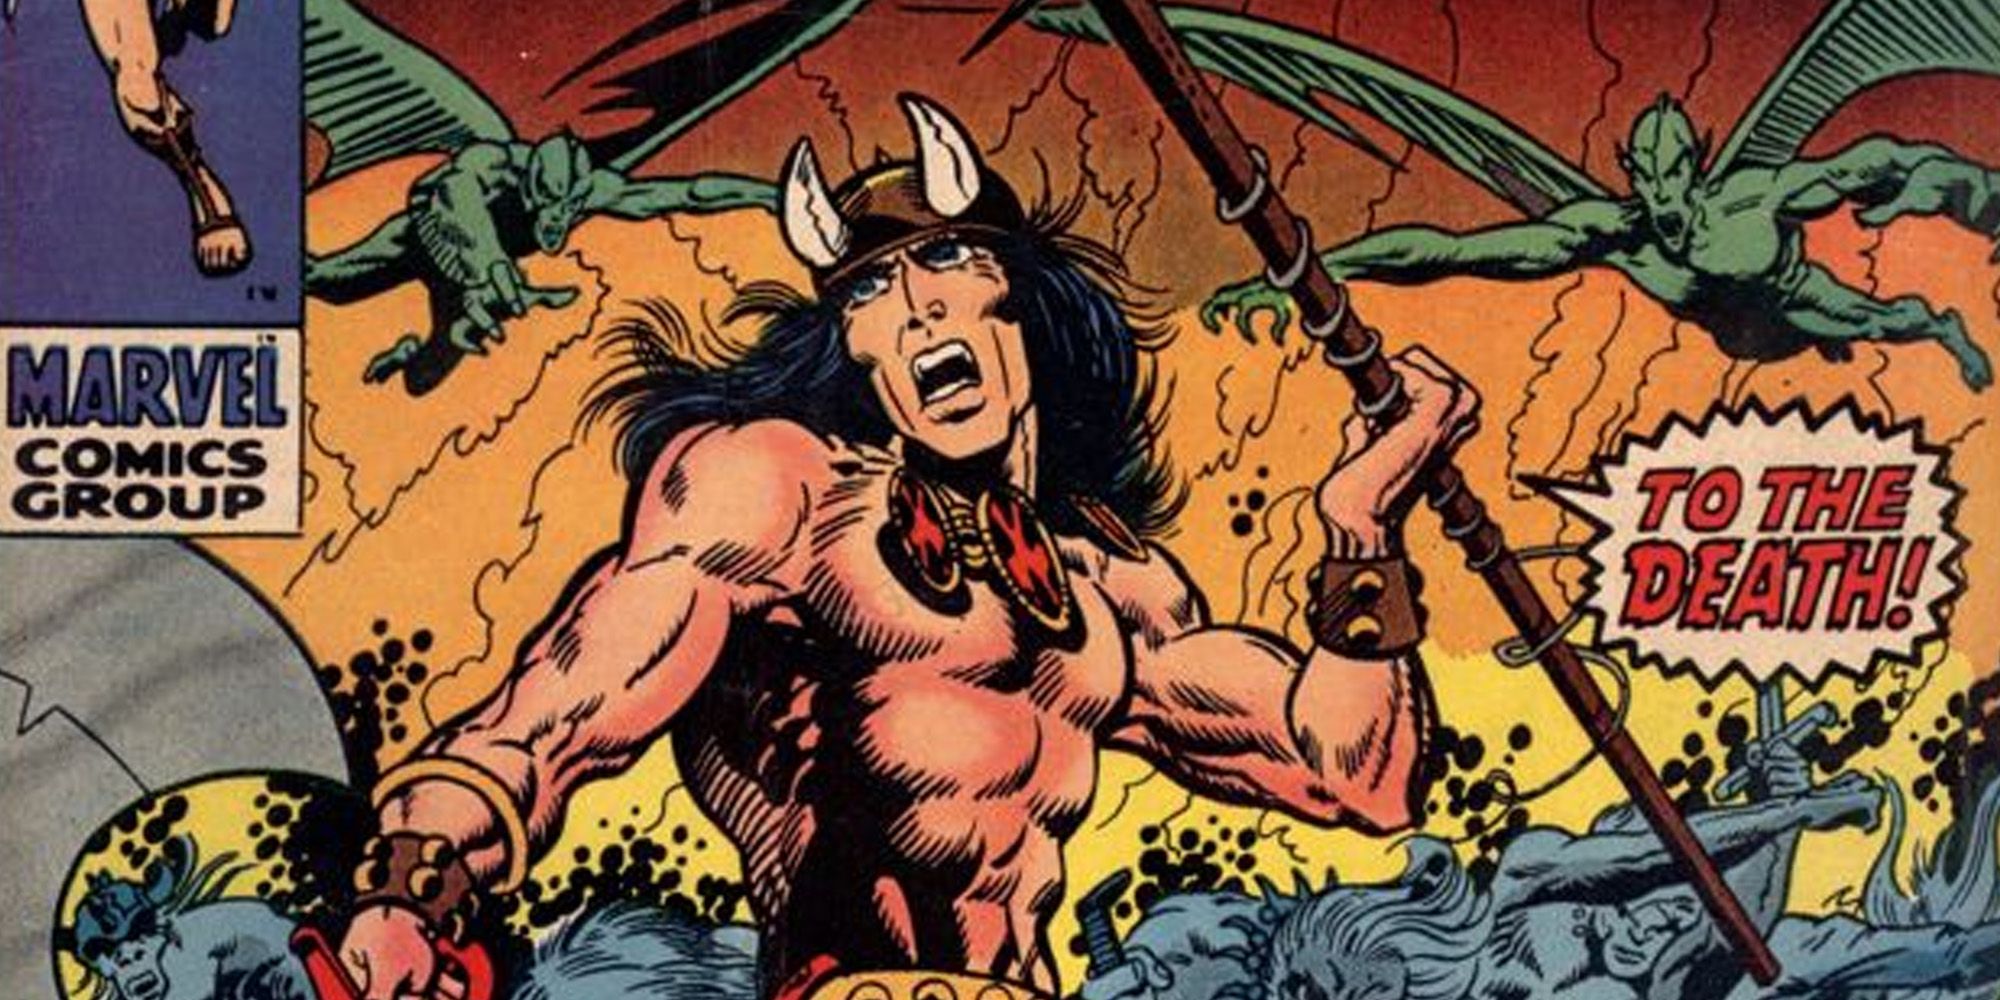 An image of Conan The Barbarian in battle in the Marvel Comics